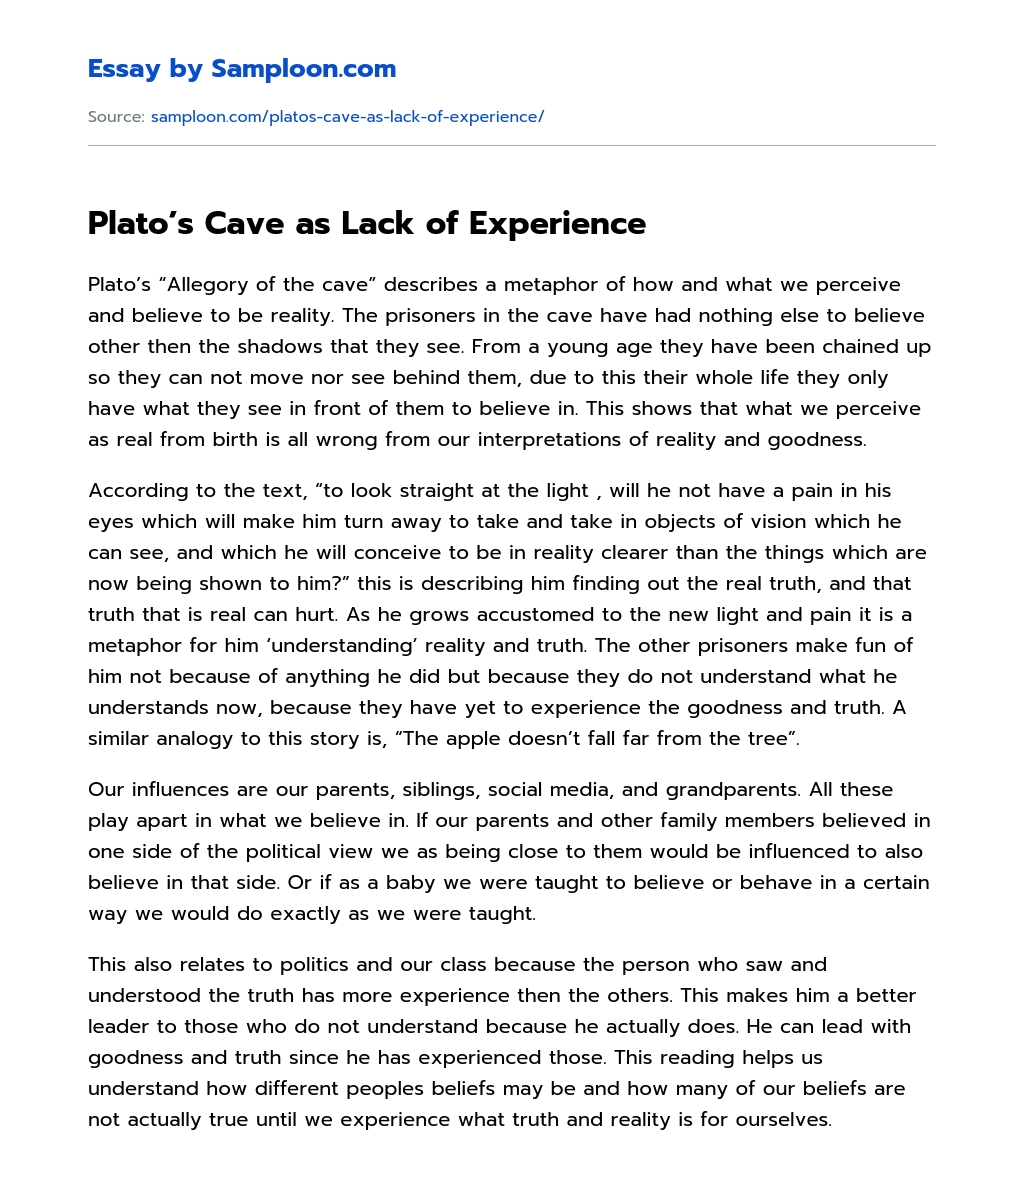 Plato’s Cave as Lack of Experience essay